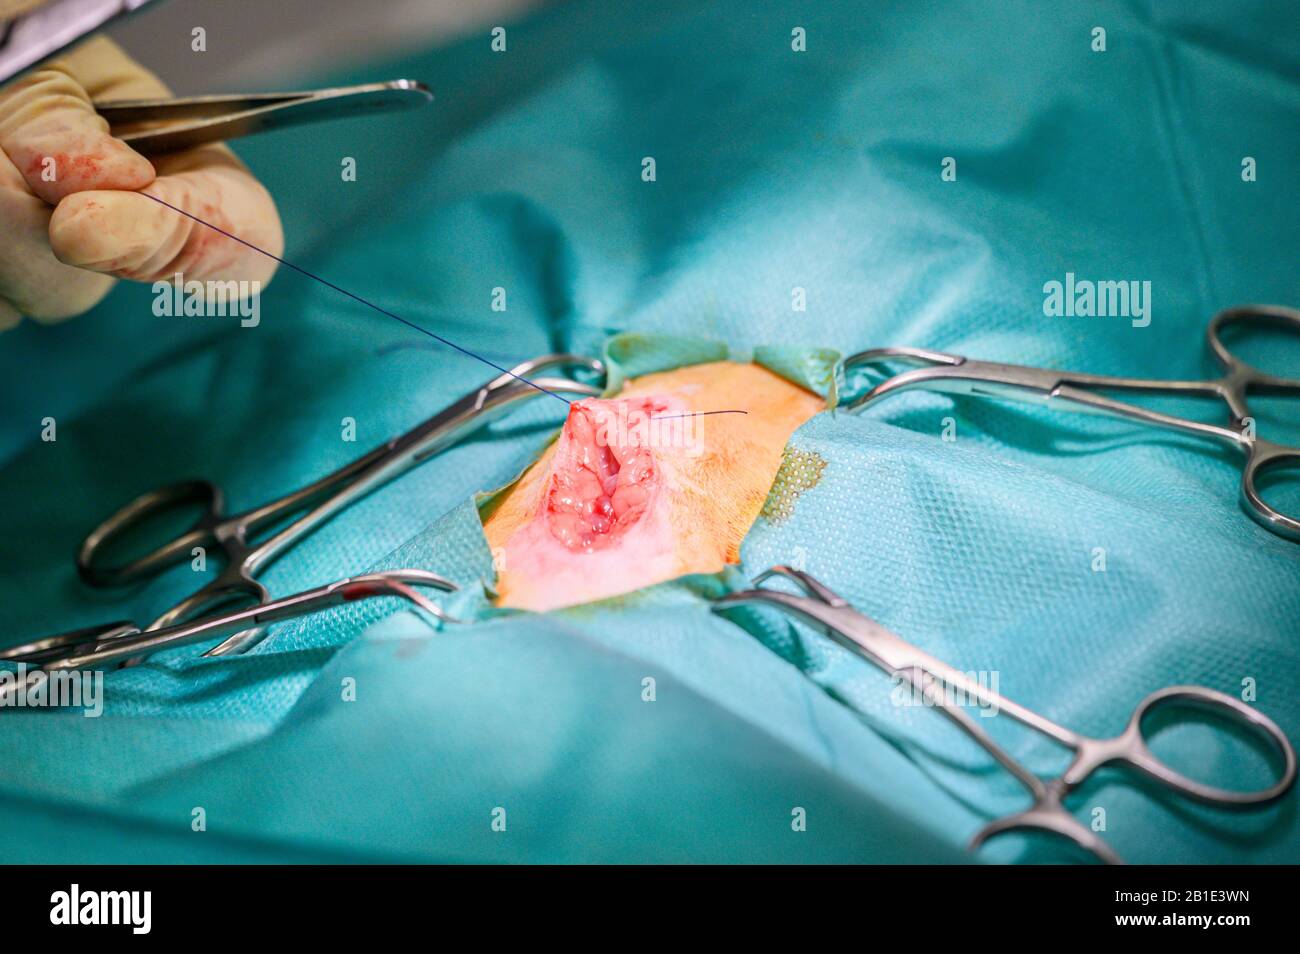 Operation process on a patient. Surgeon's hands in protective gloves doing surgery with medical tools . Stock Photo